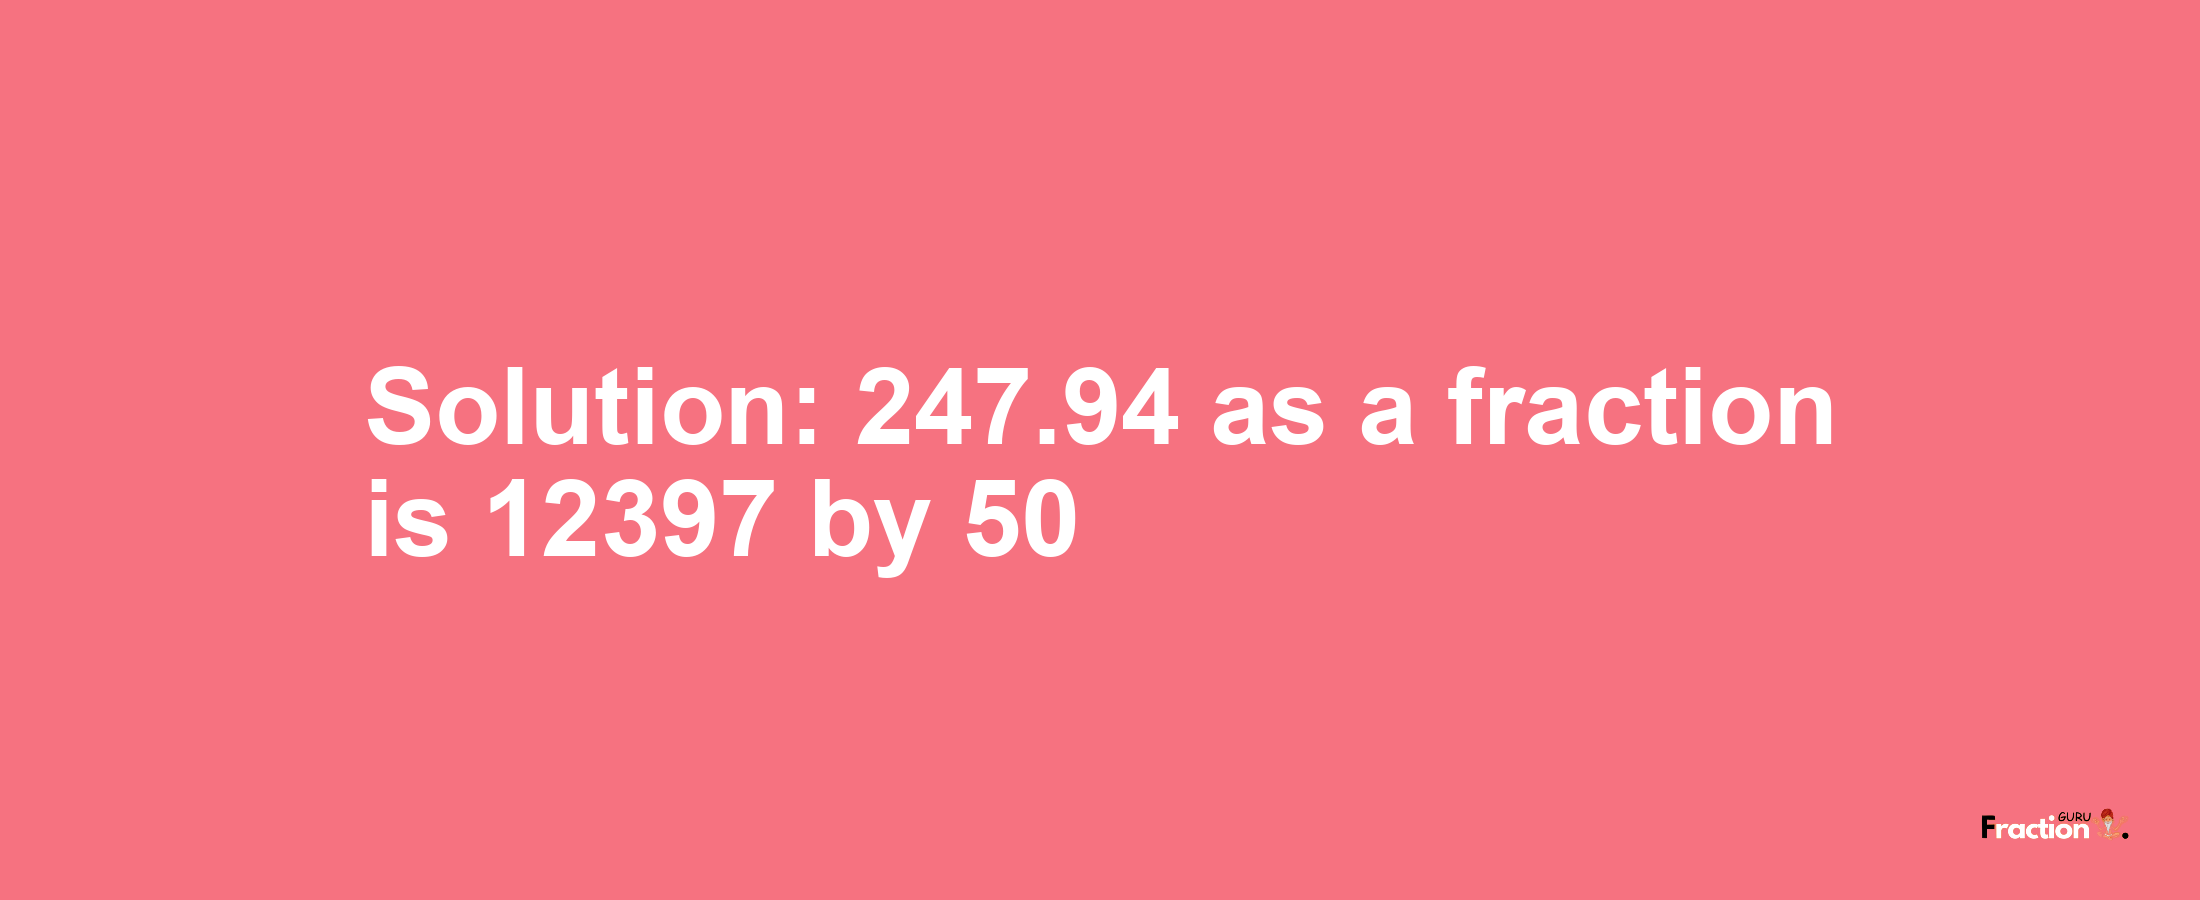 Solution:247.94 as a fraction is 12397/50